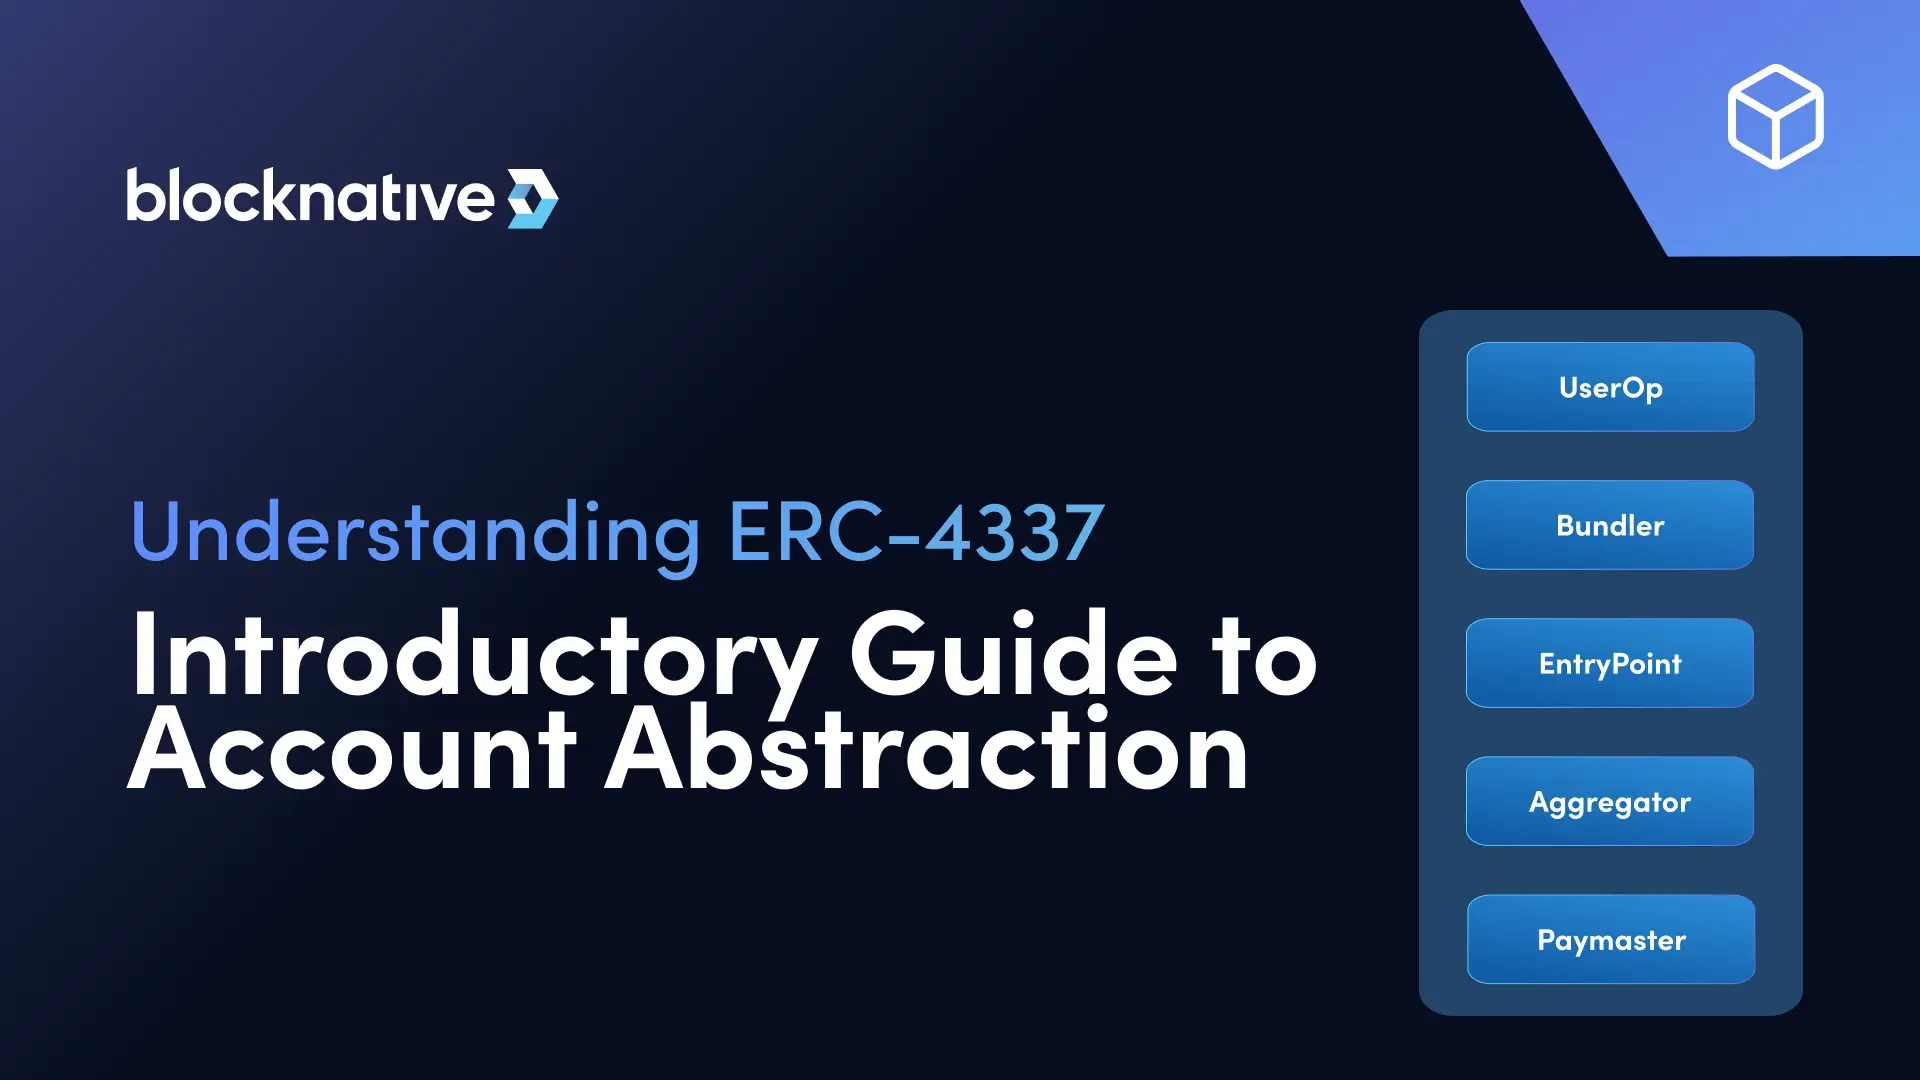 introductory-guide-to-account-abstraction-(erc-4337)